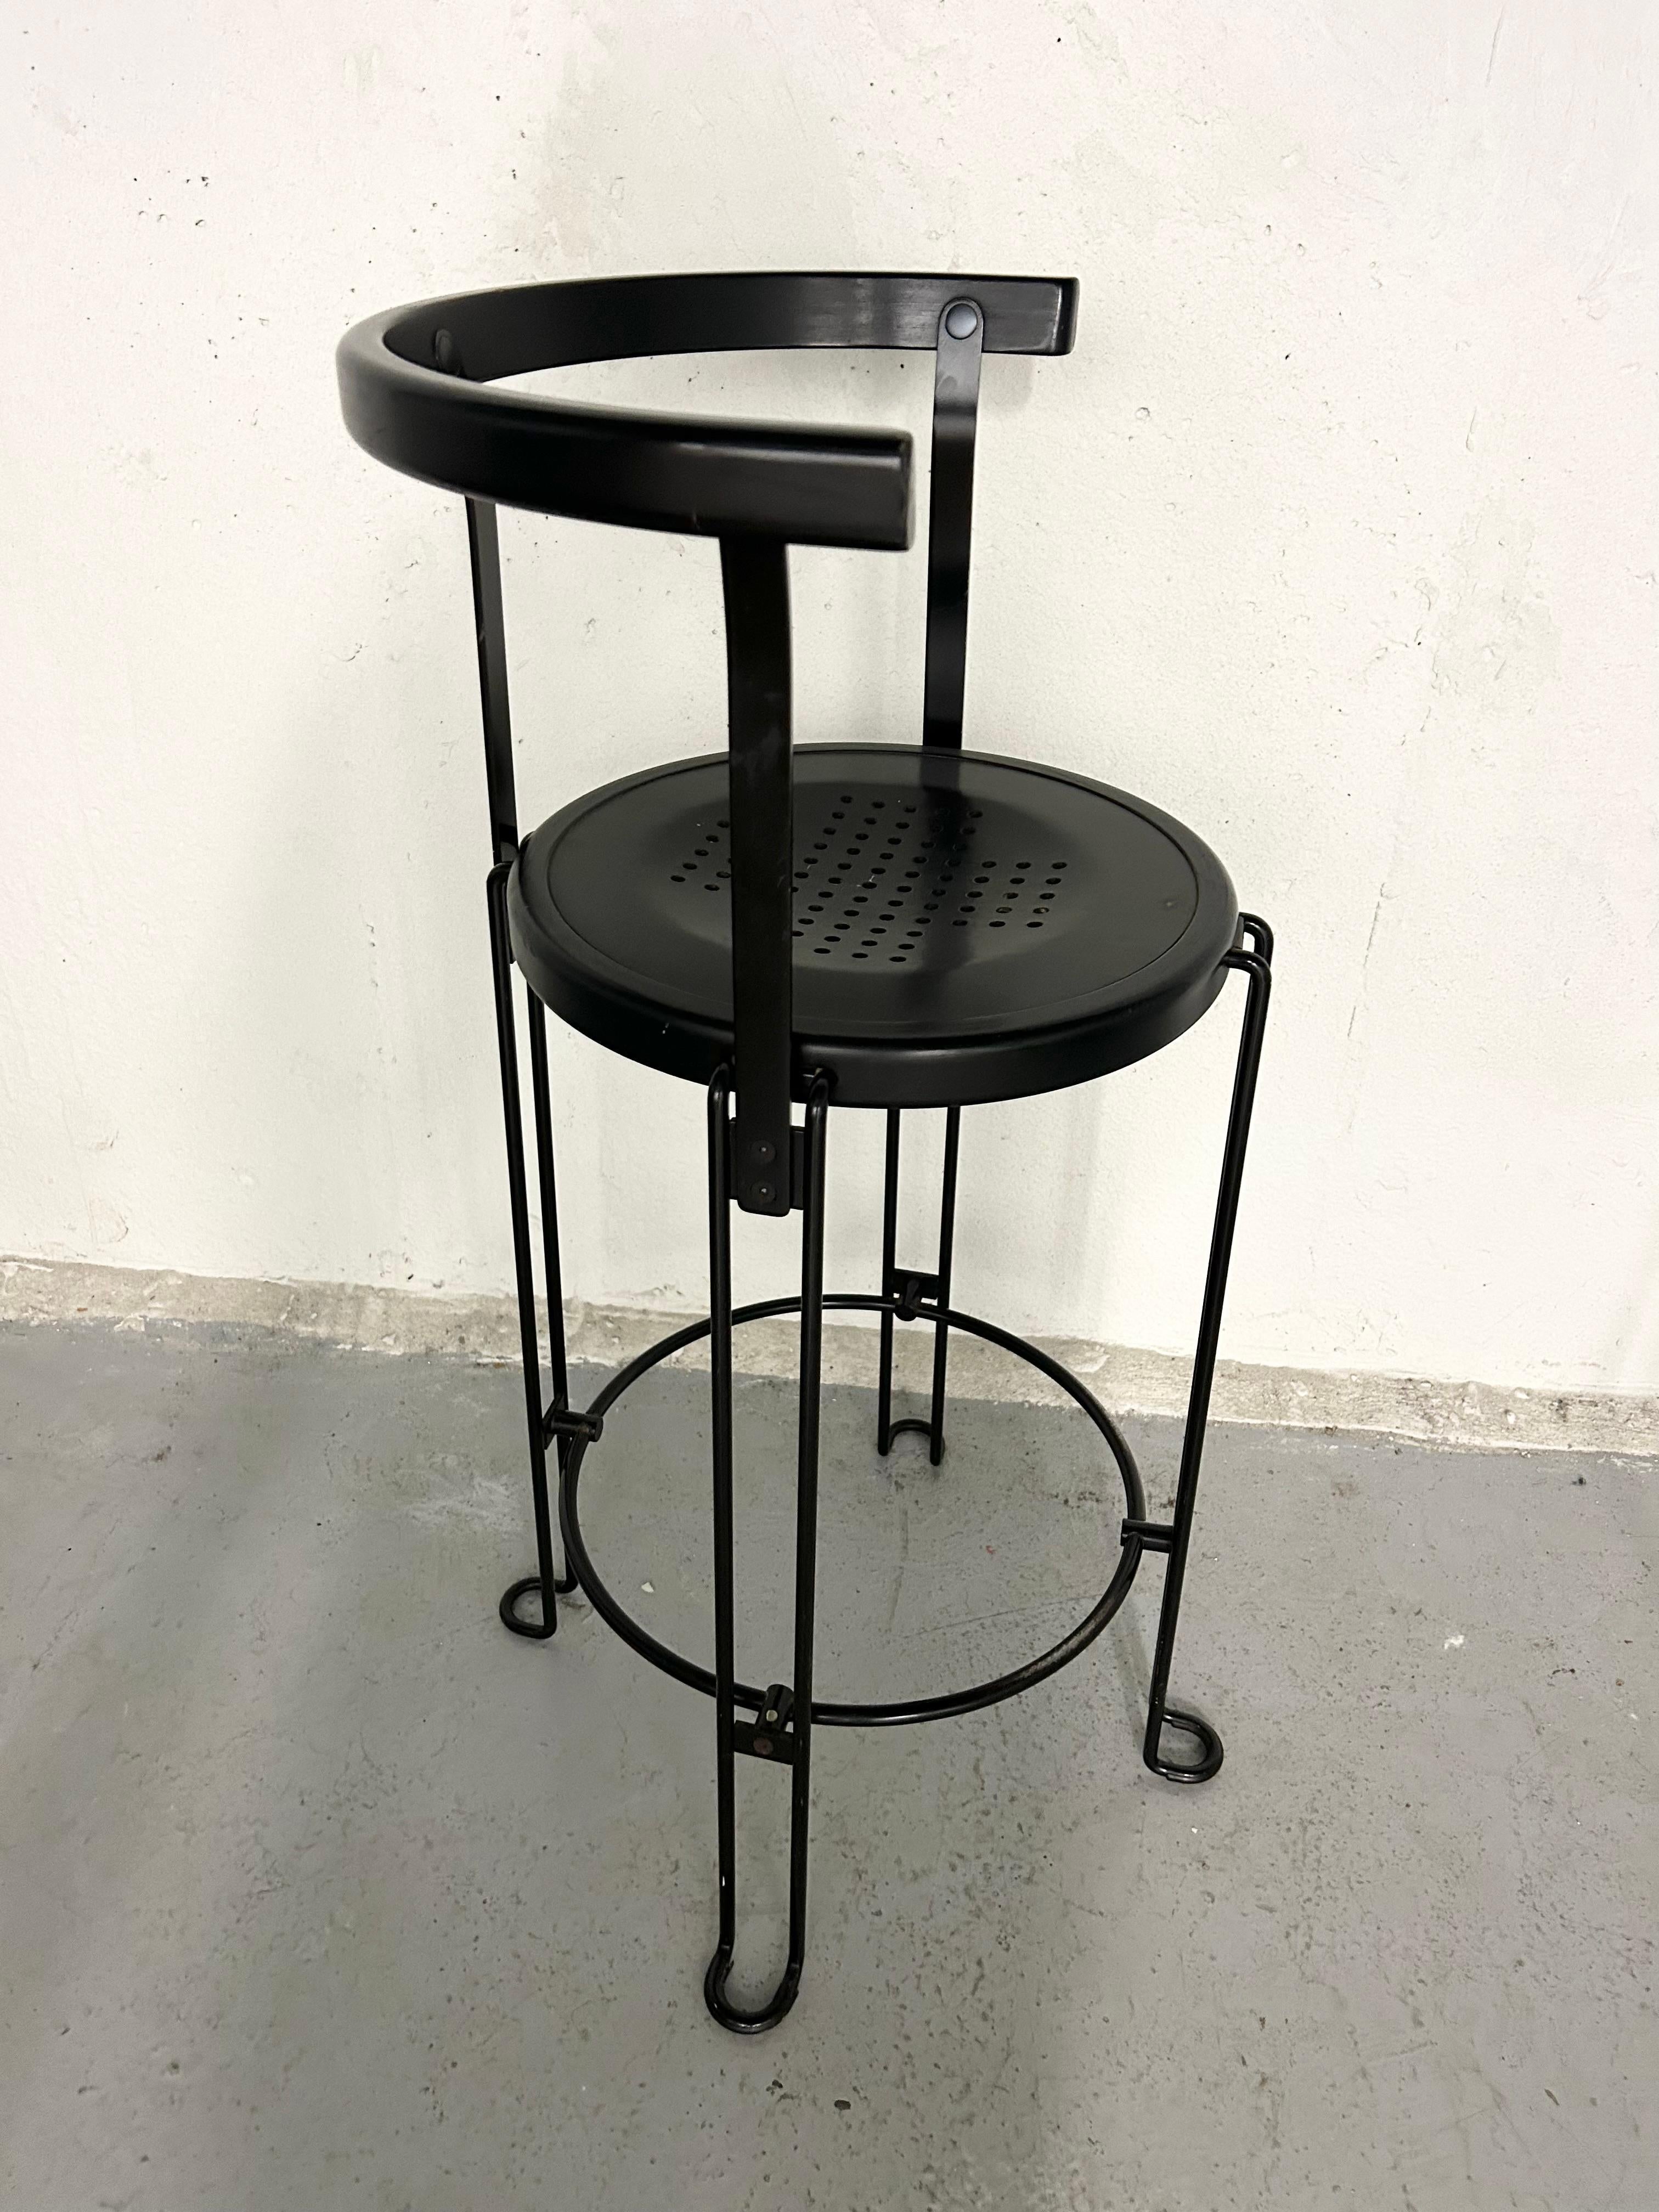 Borge Lindau for Bla Station Sweden, 1986 B4-65 Counter Height Stool 5